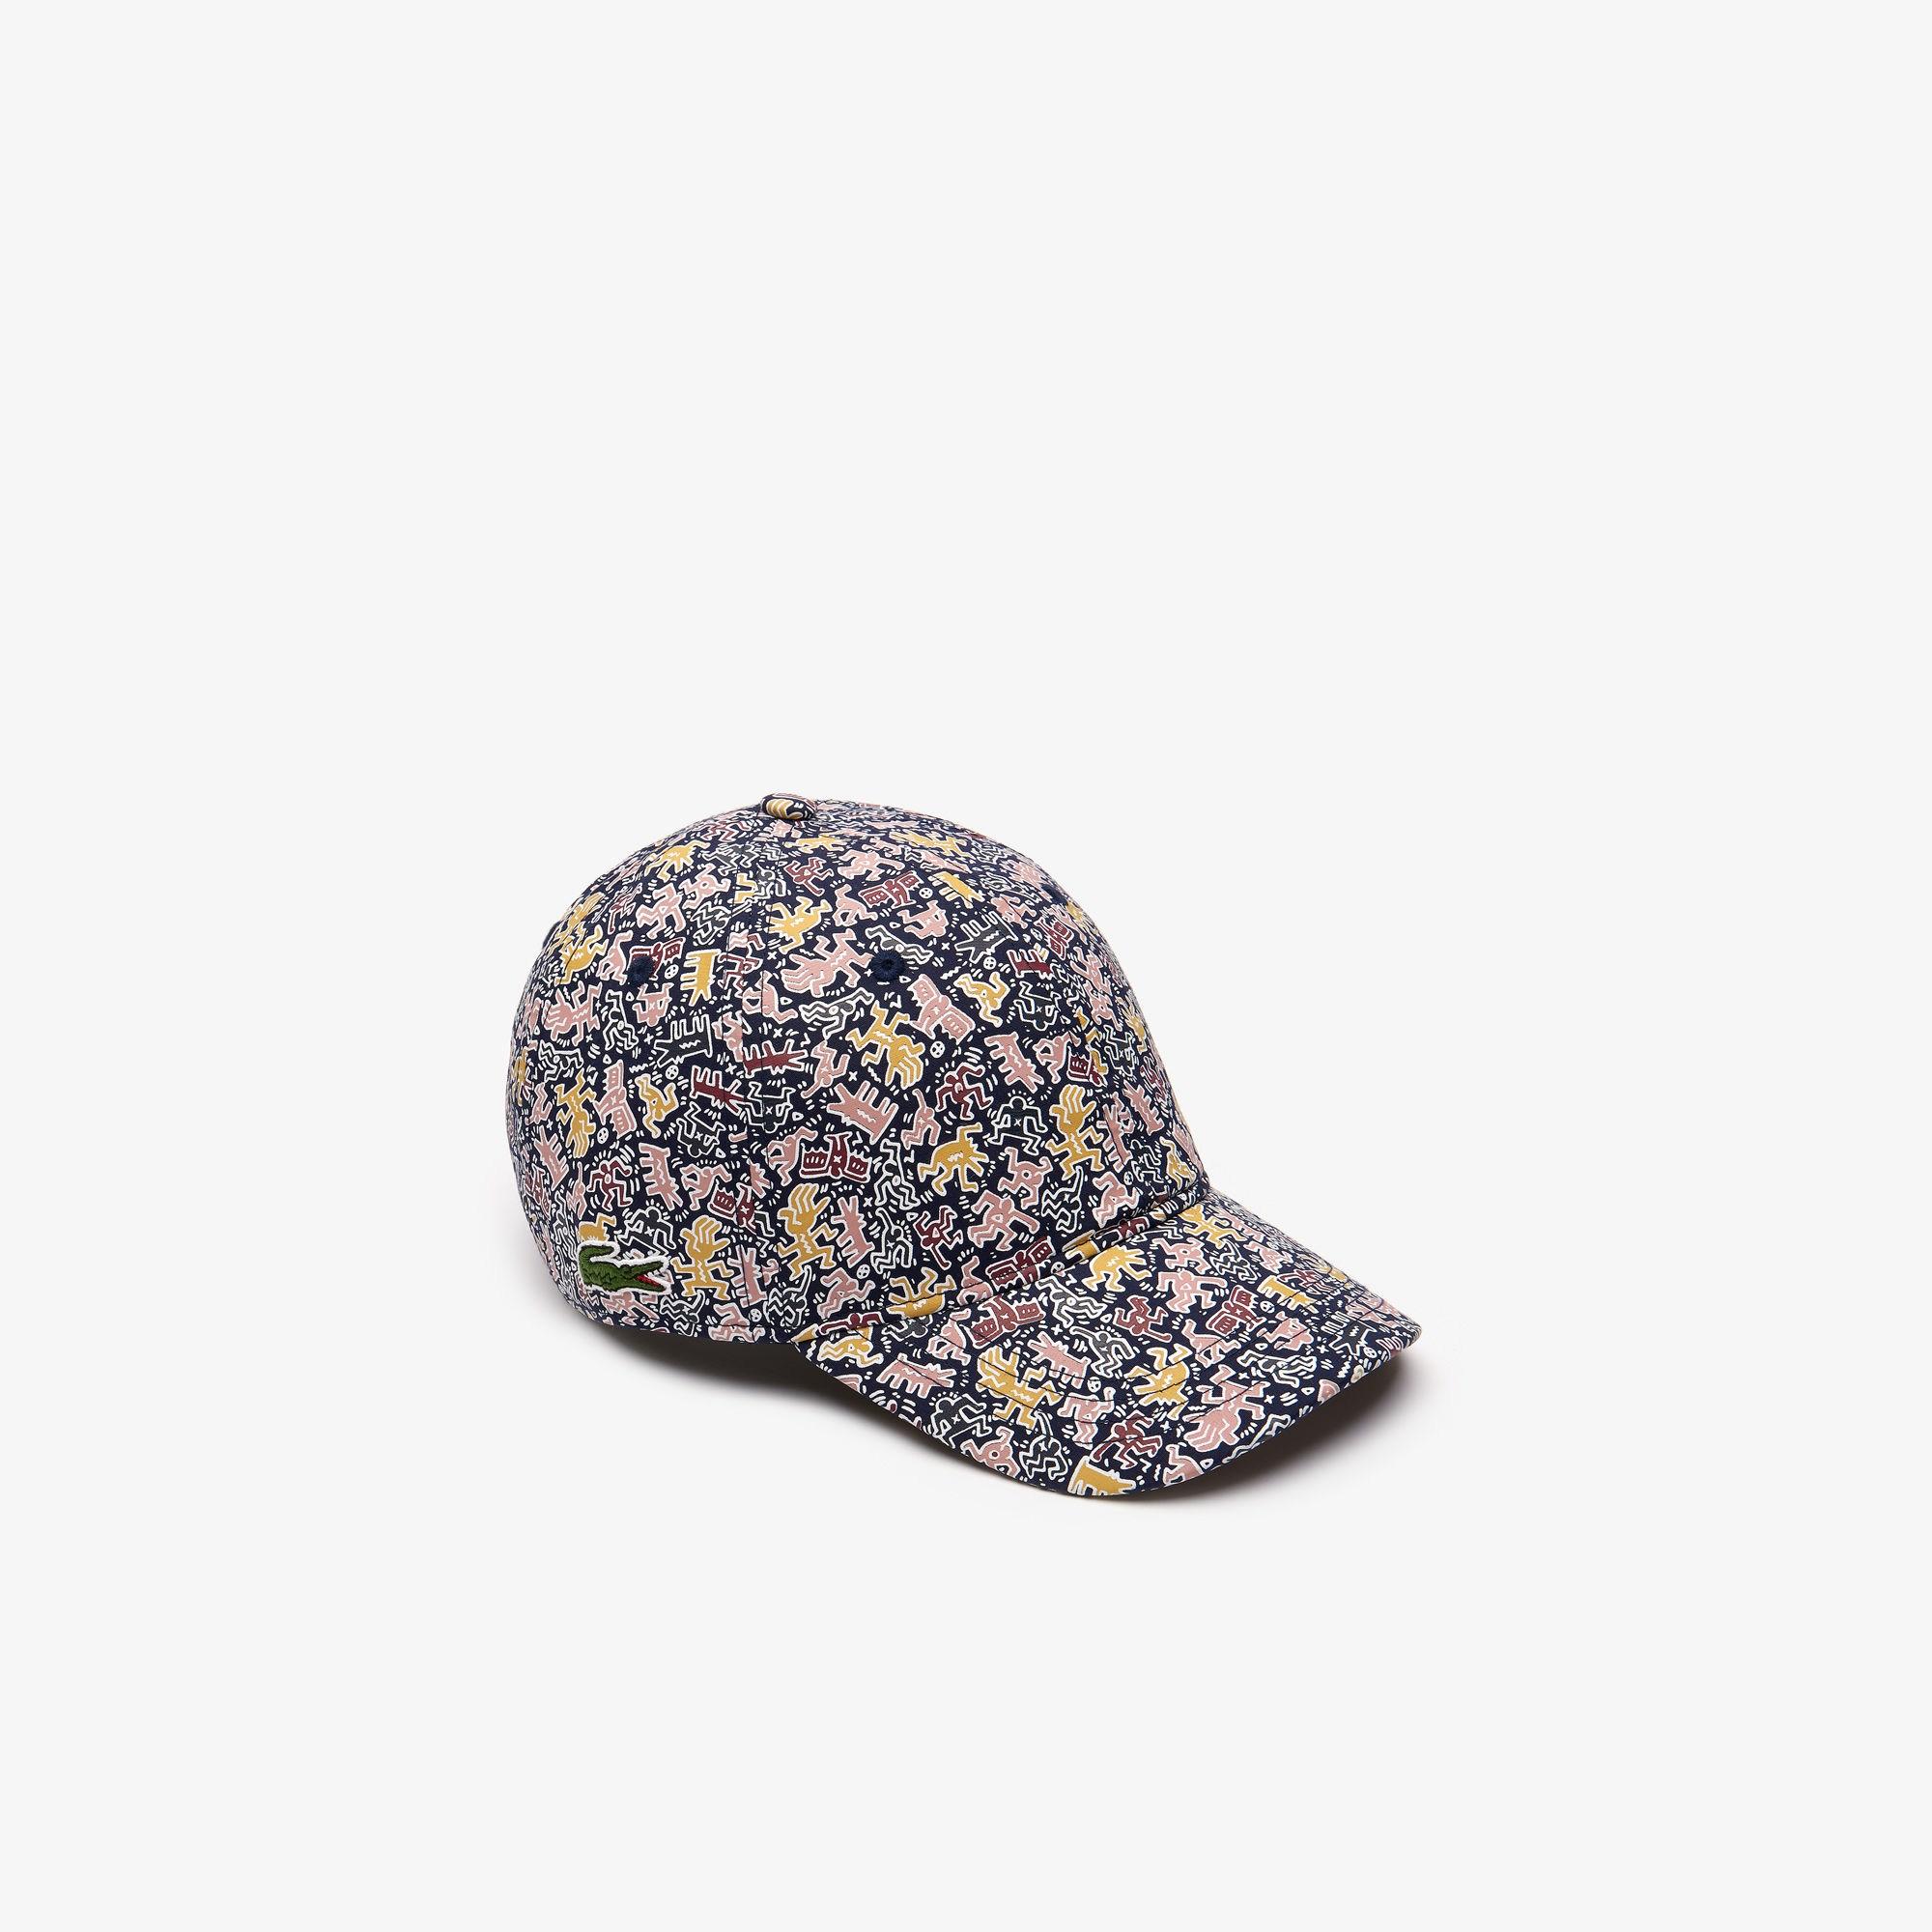 lacoste keith haring hat